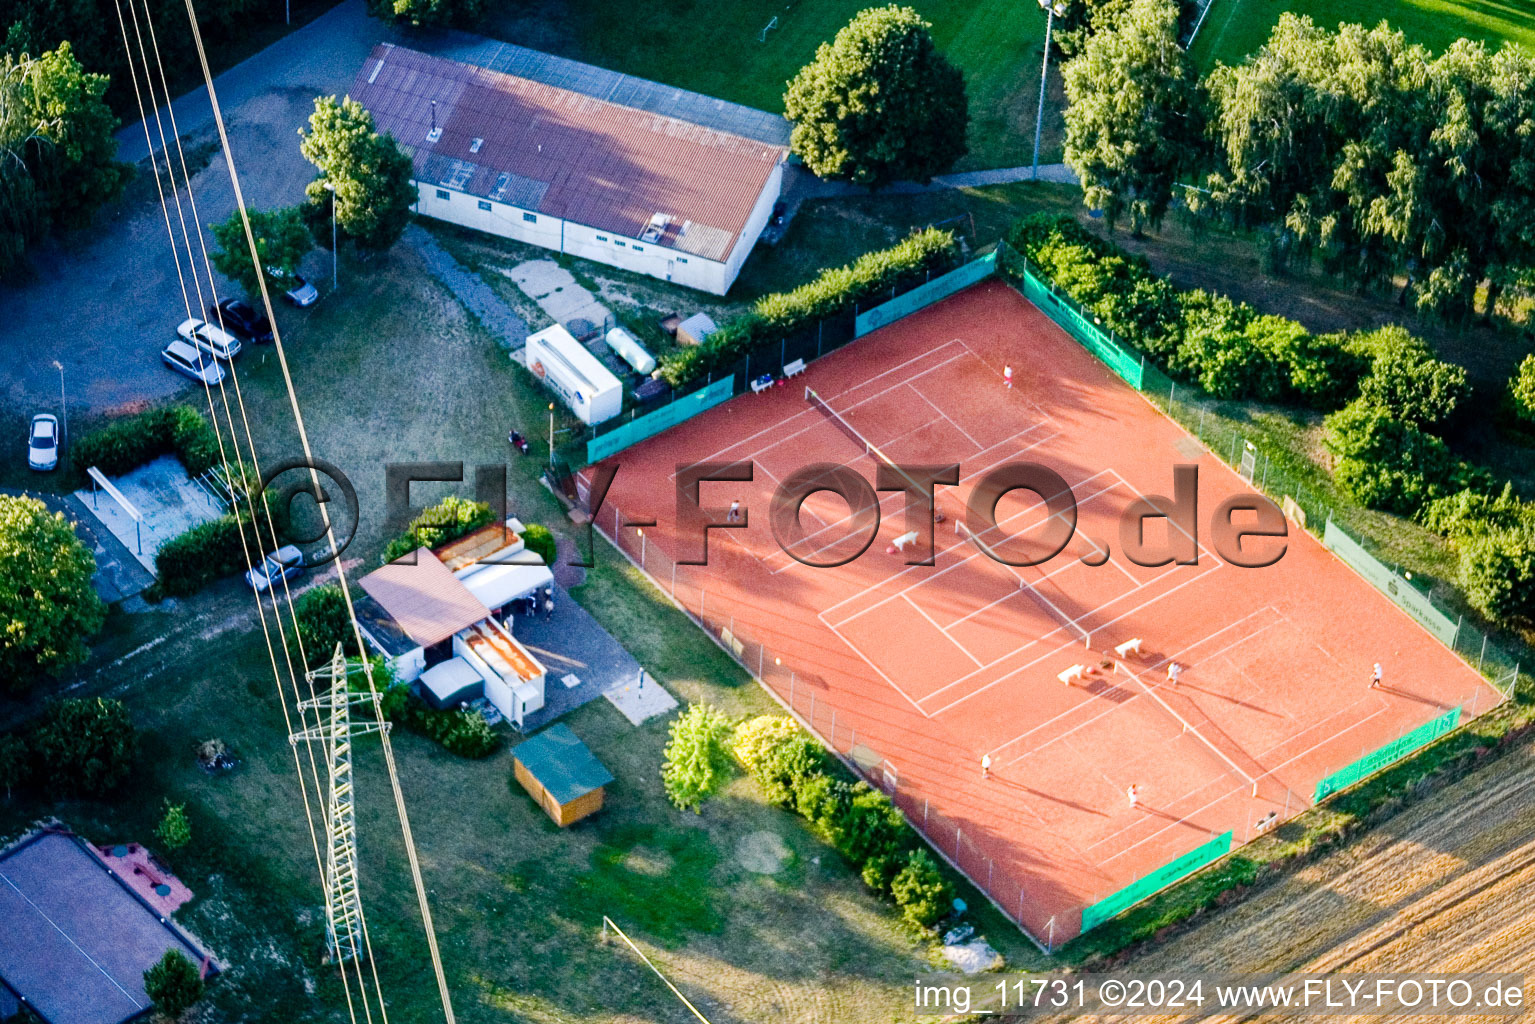 Aerial photograpy of Tennis club SV 1965 in Erlenbach bei Kandel in the state Rhineland-Palatinate, Germany